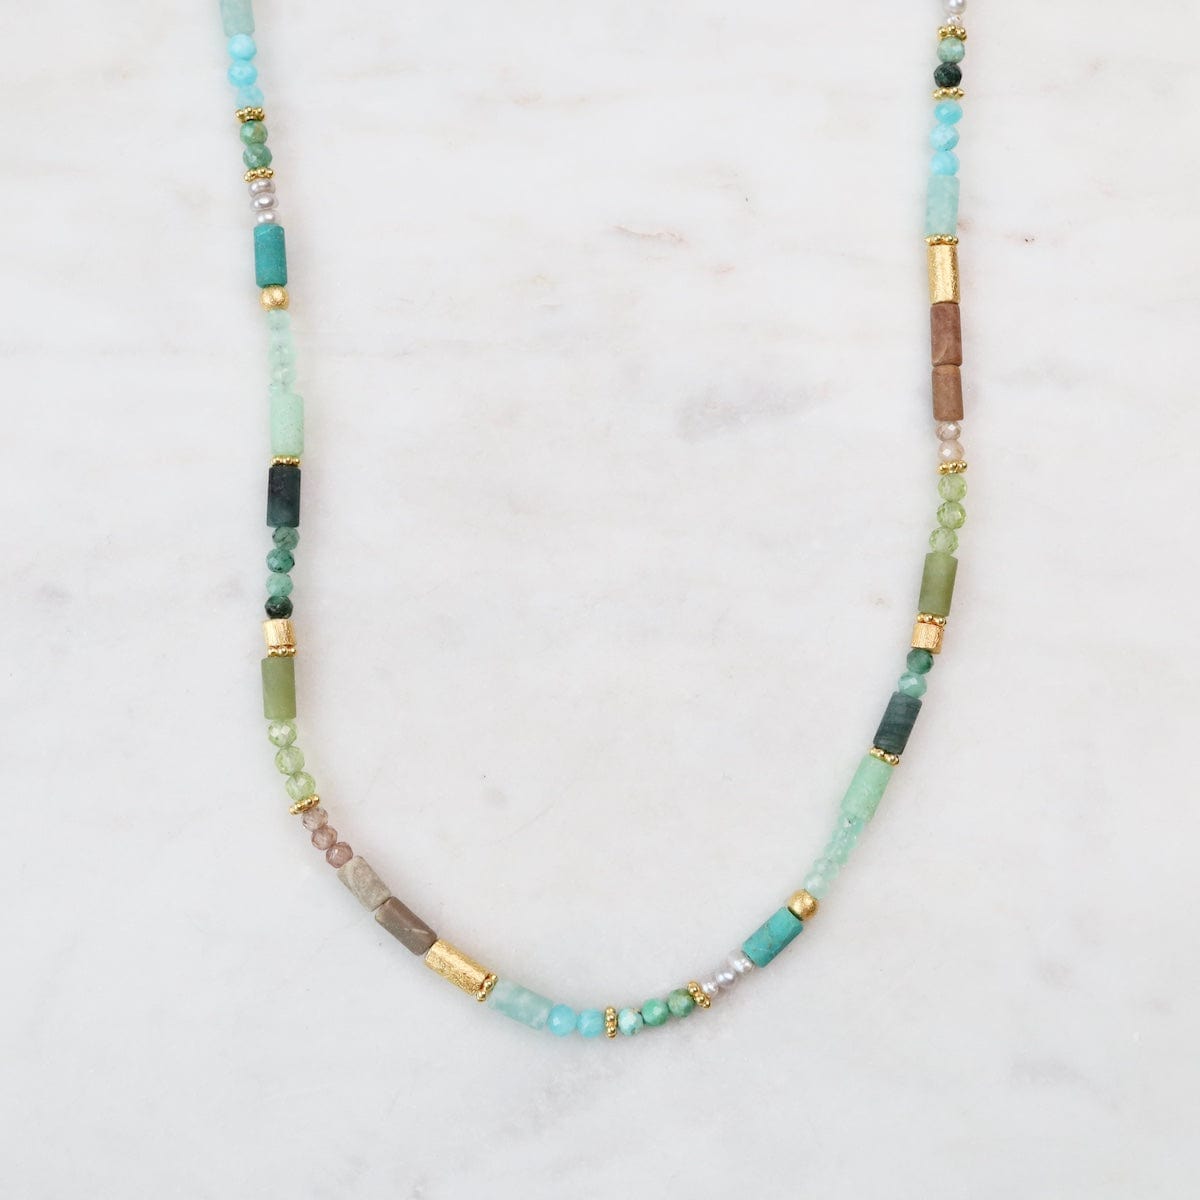 NKL-VRM Green Stone Mix Necklace